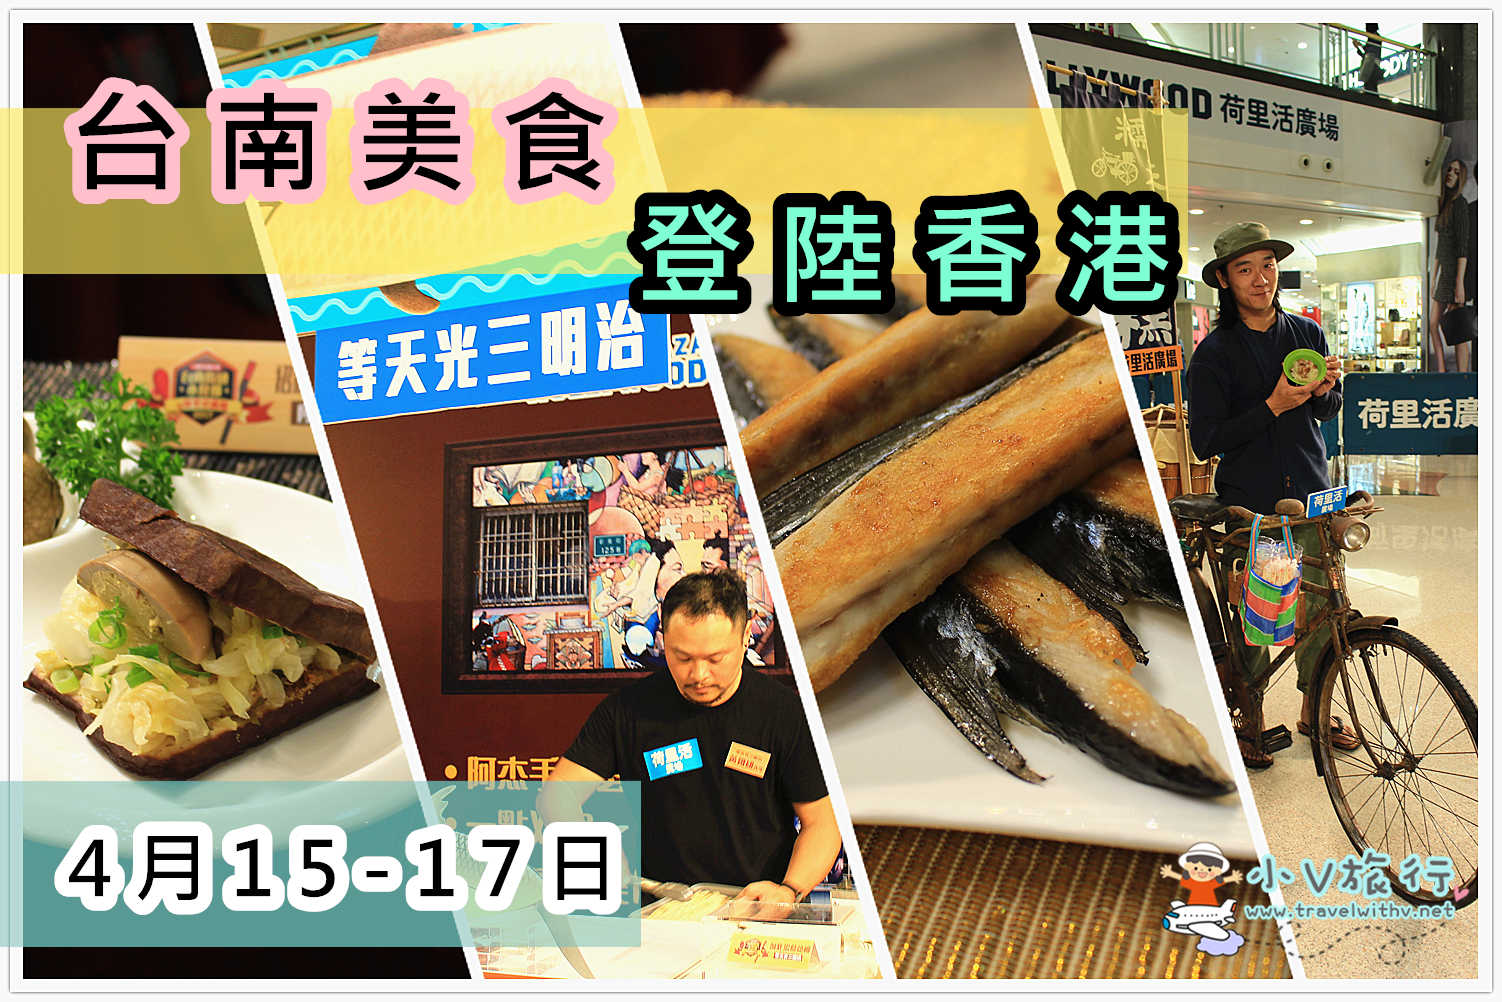 You are currently viewing 【台南街頭小食節】登陸香港！<br />2017年4月15-17日